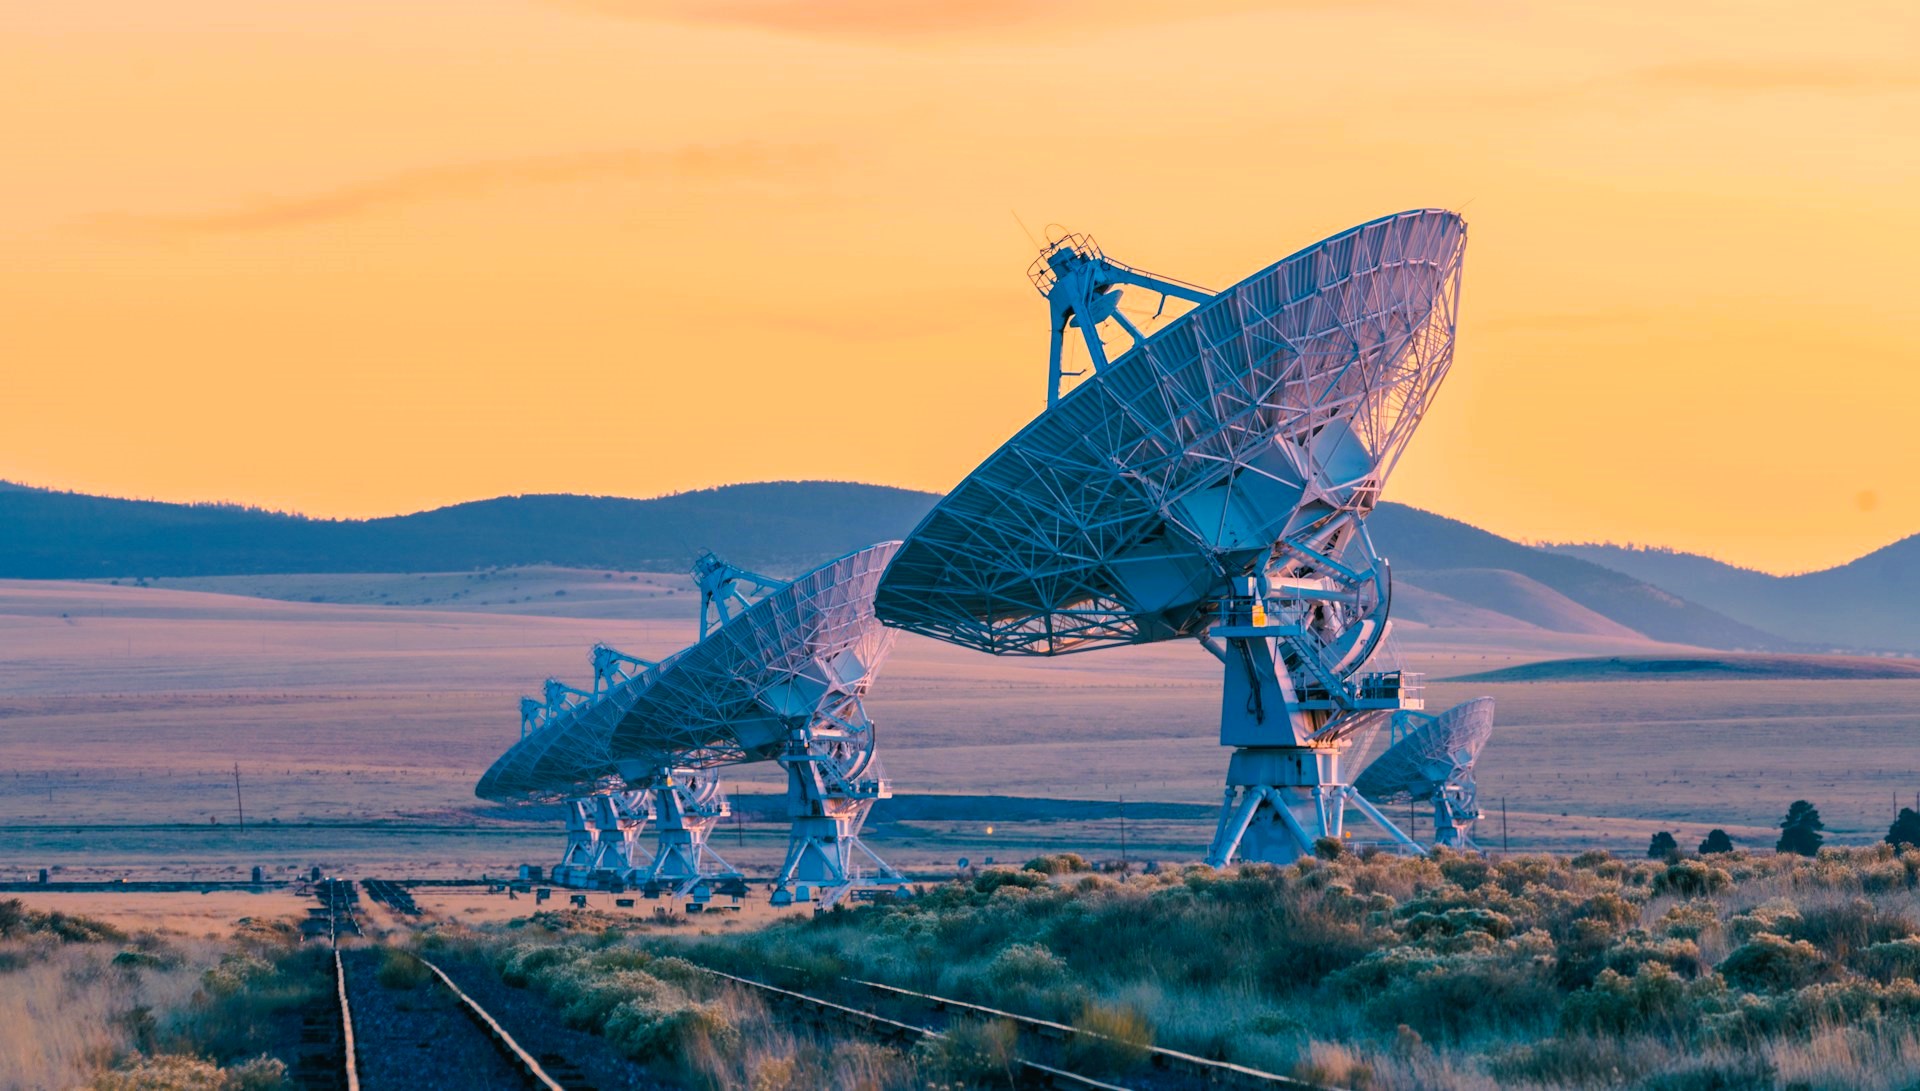 Radio telescopes are taught to “bypass” the Earth’s atmosphere